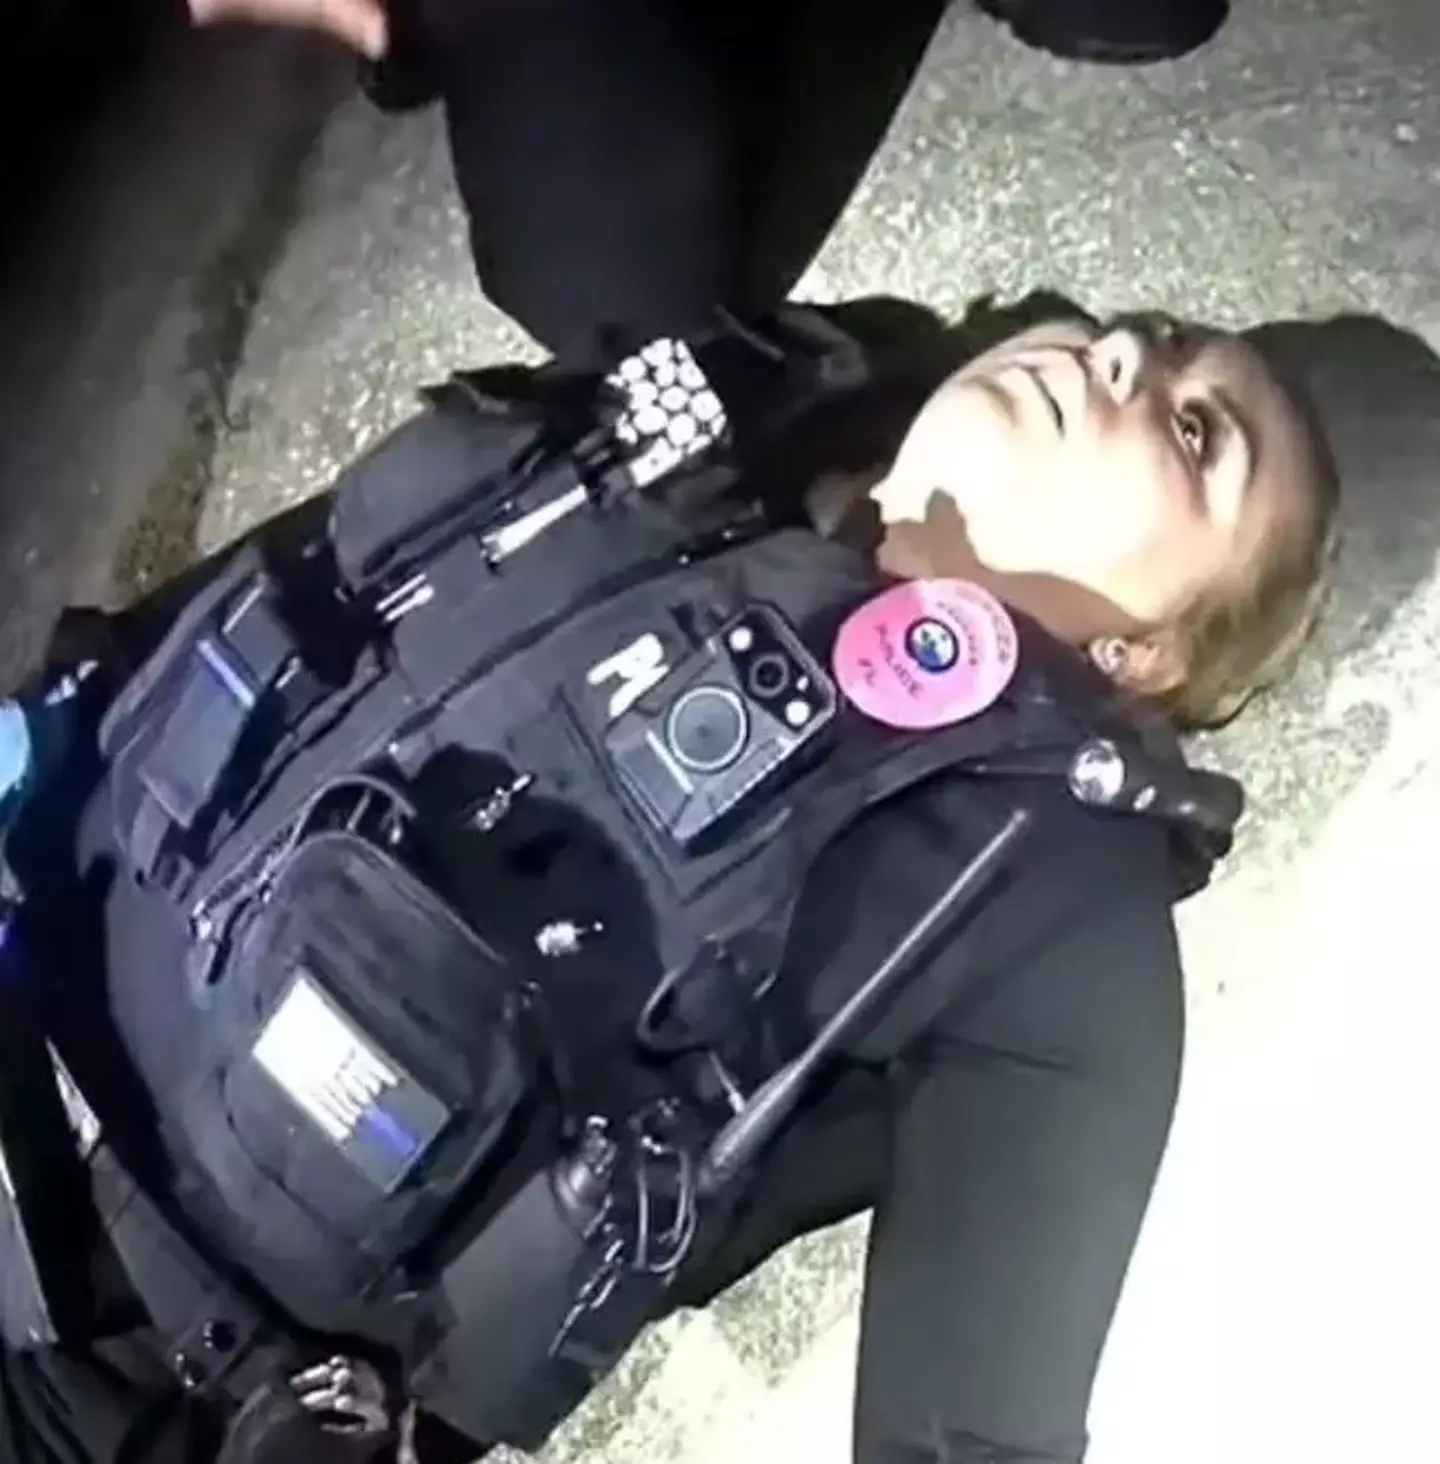 Cops released a clip of Officer Courtney Bannick lying motionless on the side of a road after being exposed to fentanyl.